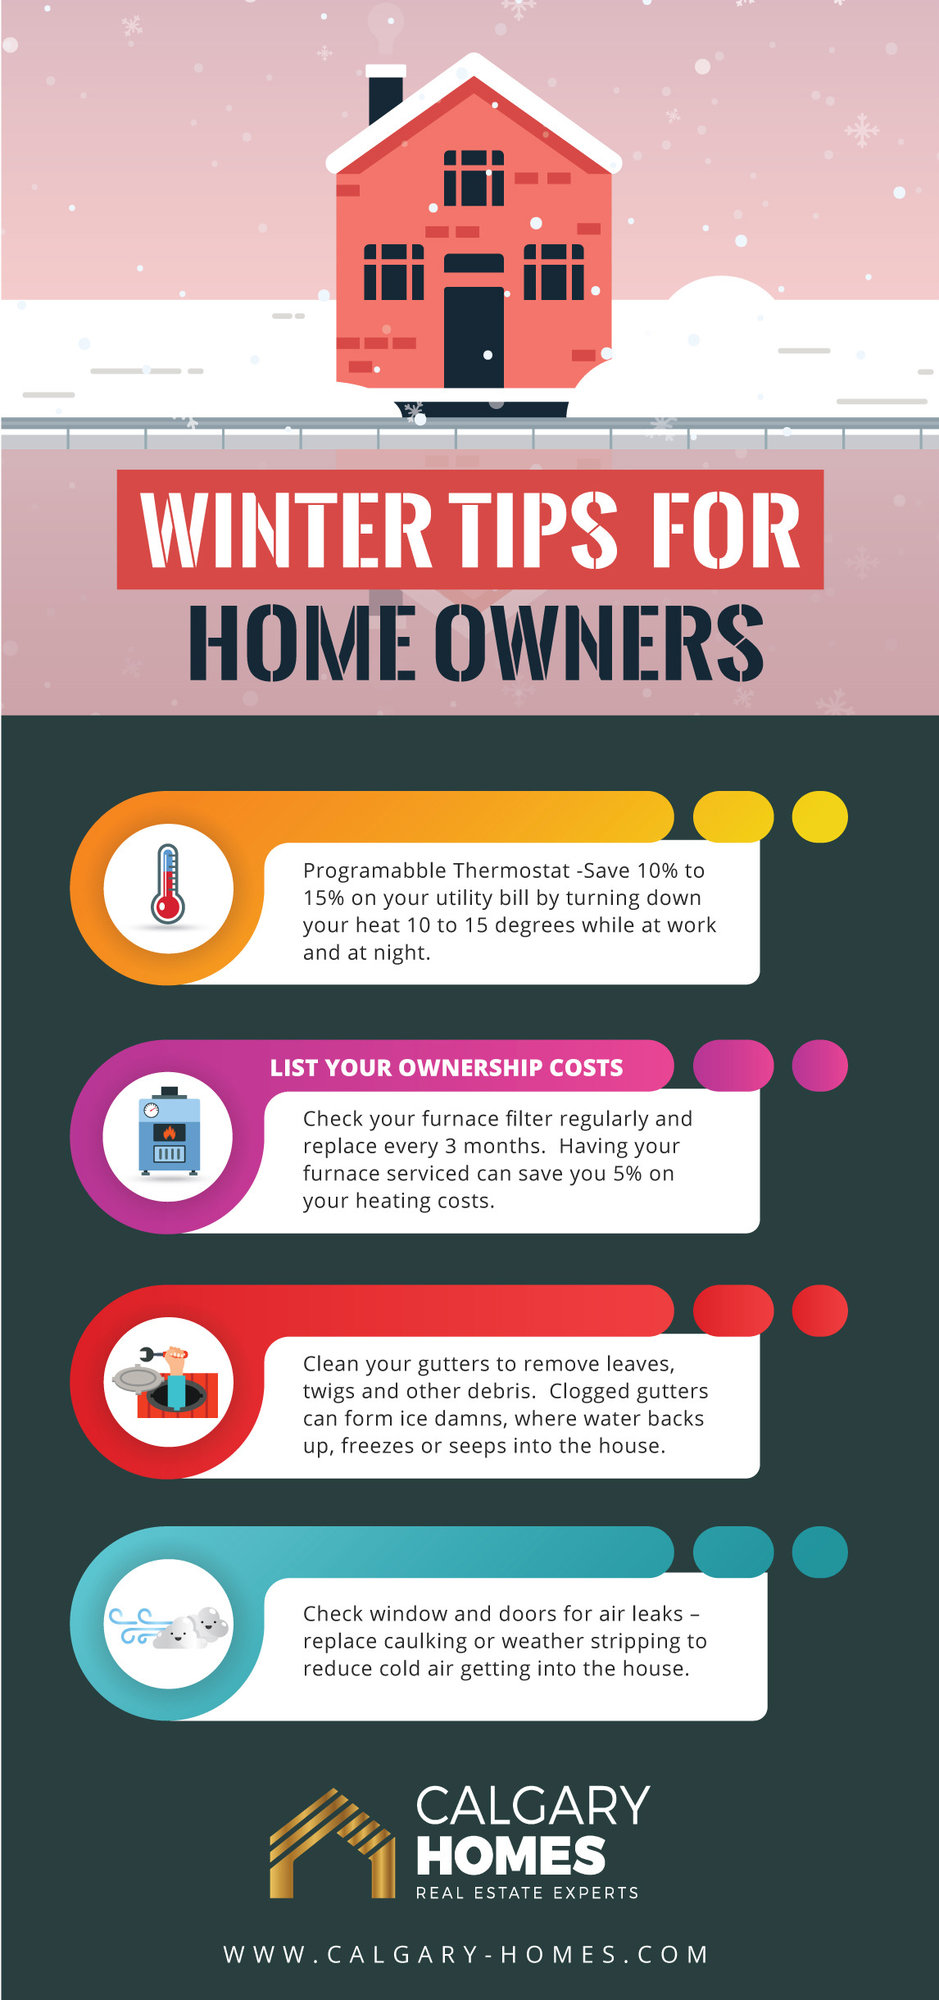 Winter Tips for Home Owners